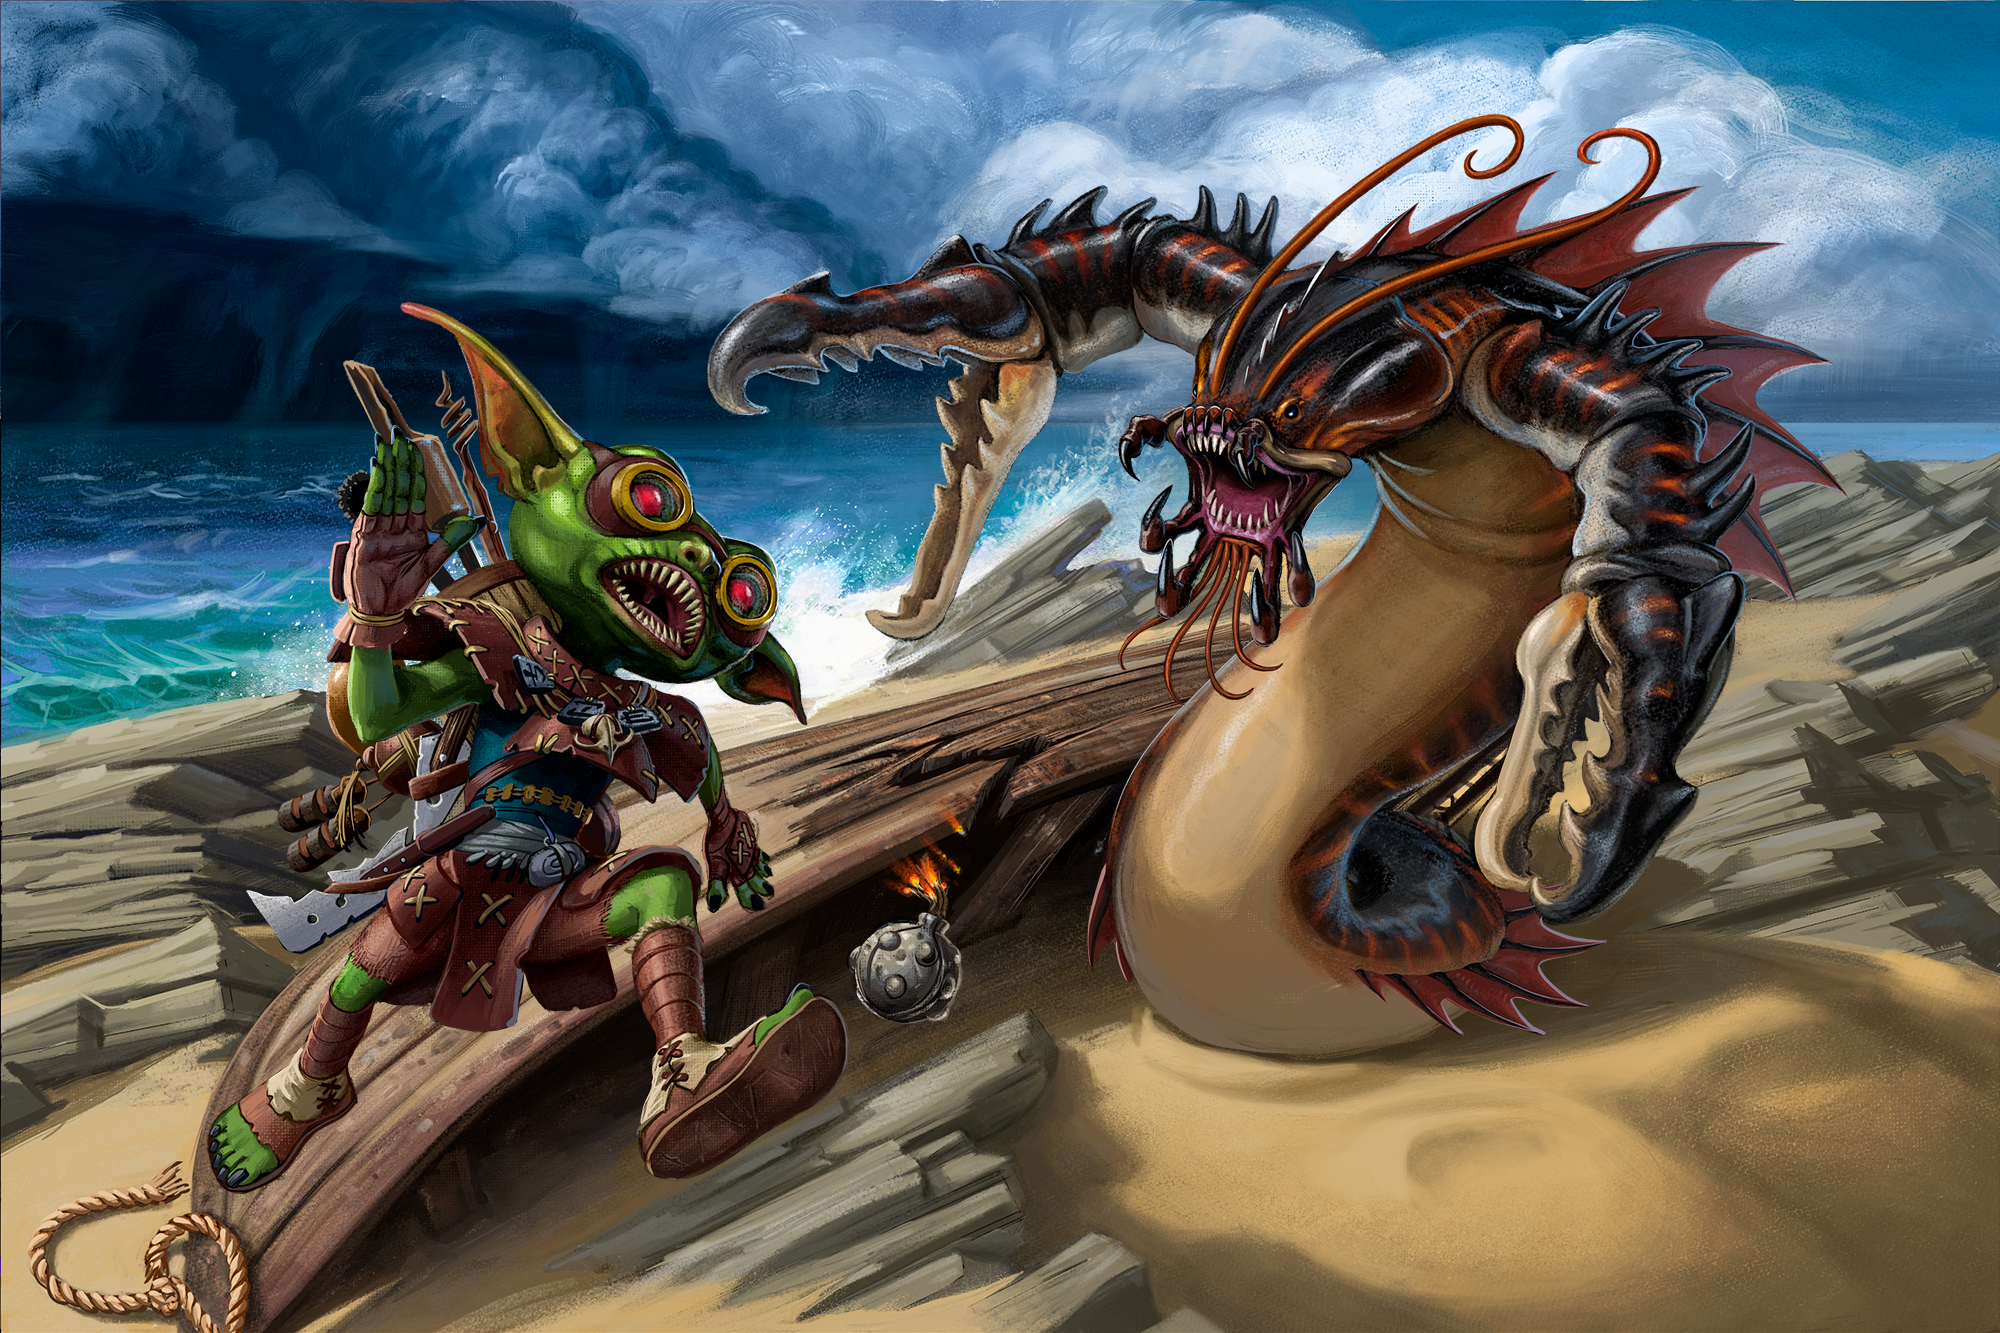 An illustration of Fumbus fighting a Reefclaw.